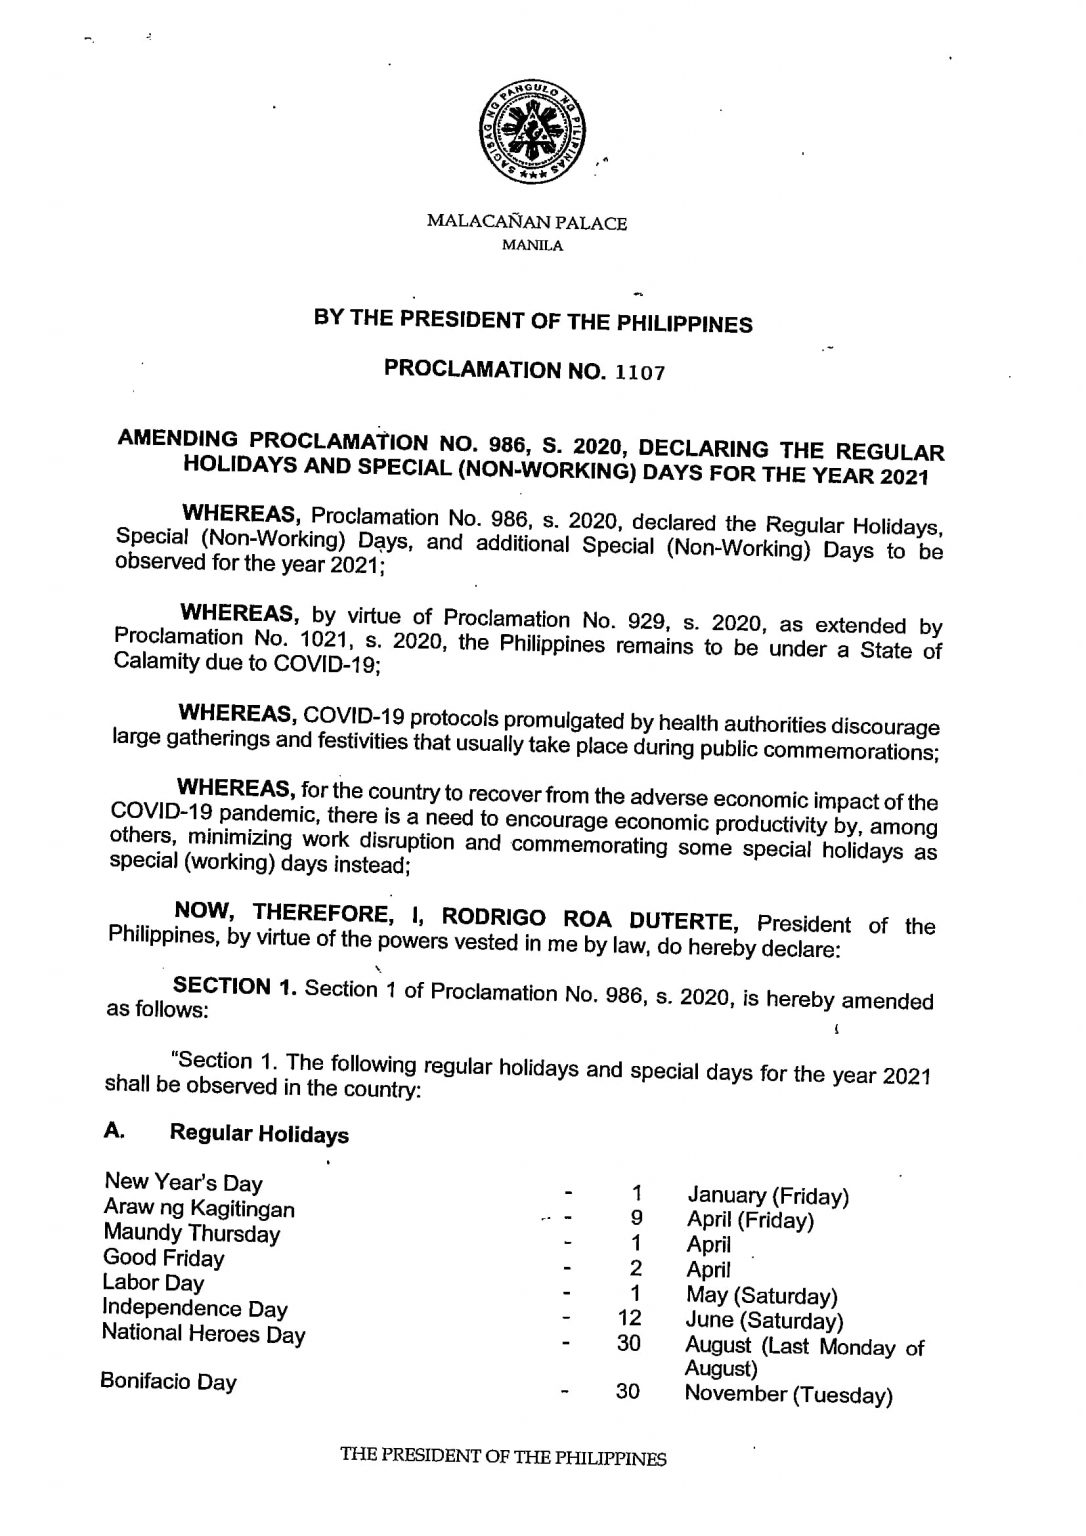 Revised [New] Philippine Holidays Proclamation No. 1107 for 2021